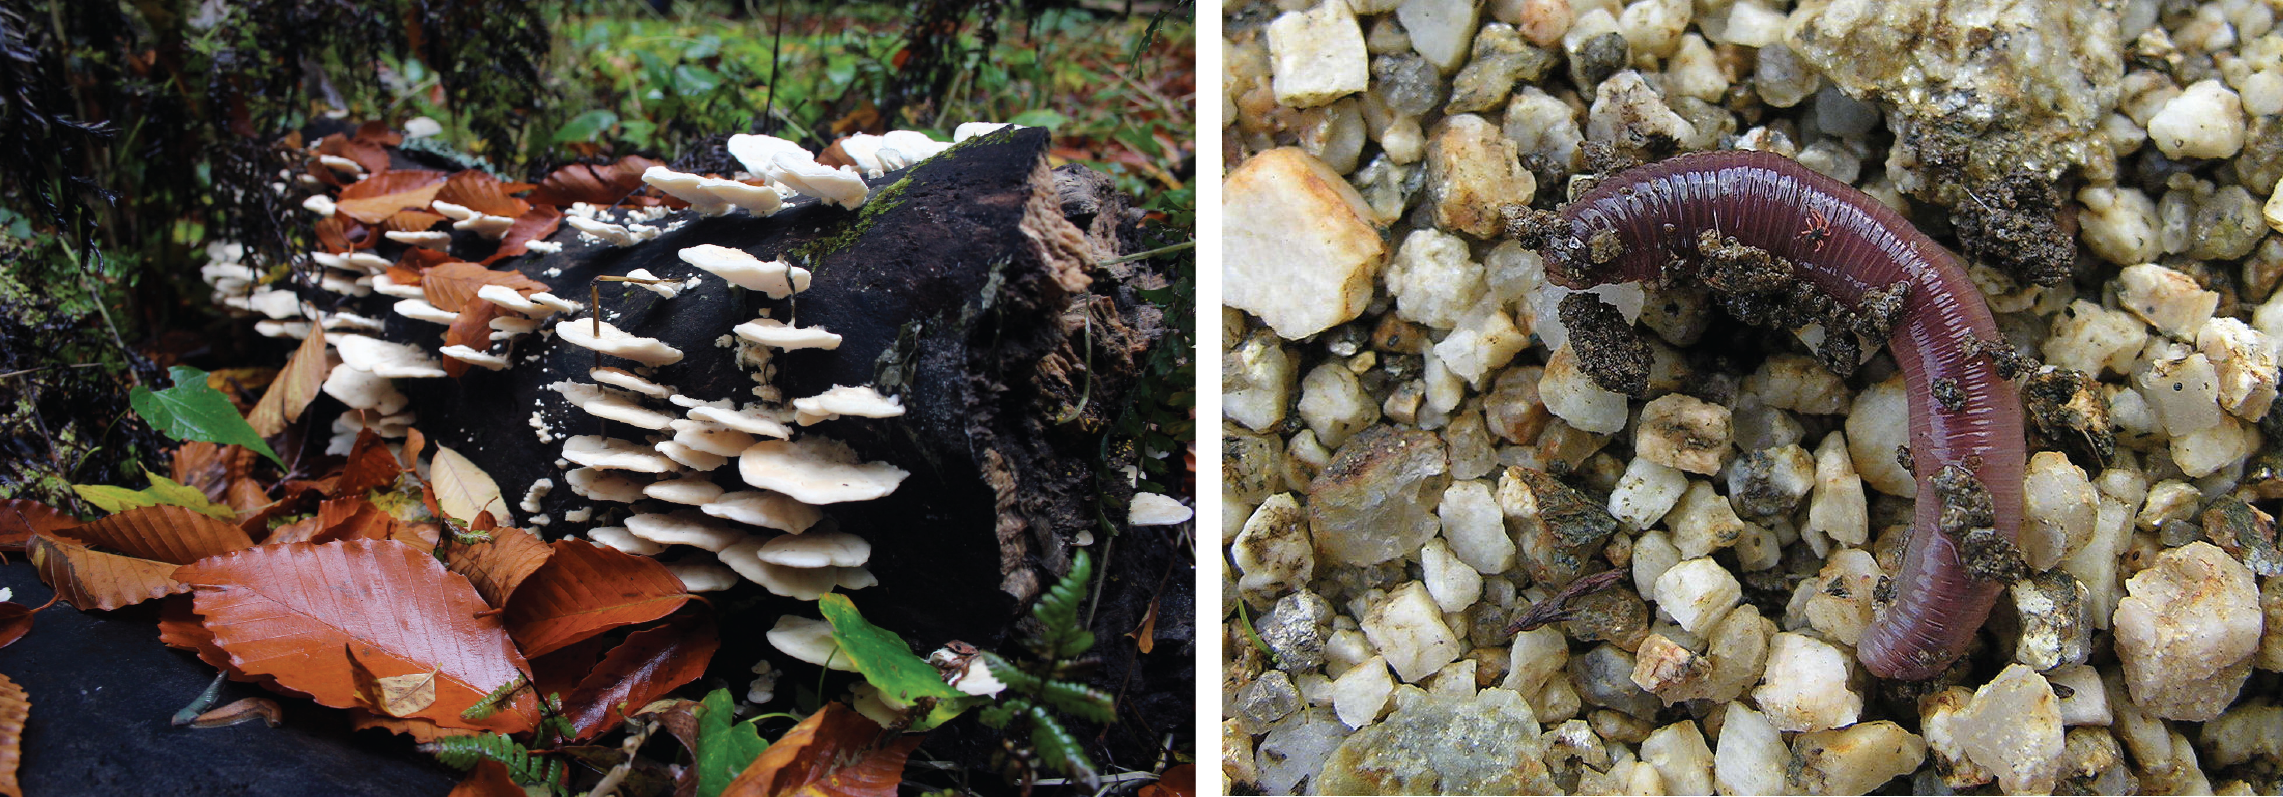 Examples of decomposers: left, fungi growing on a log; right, an earthworm.